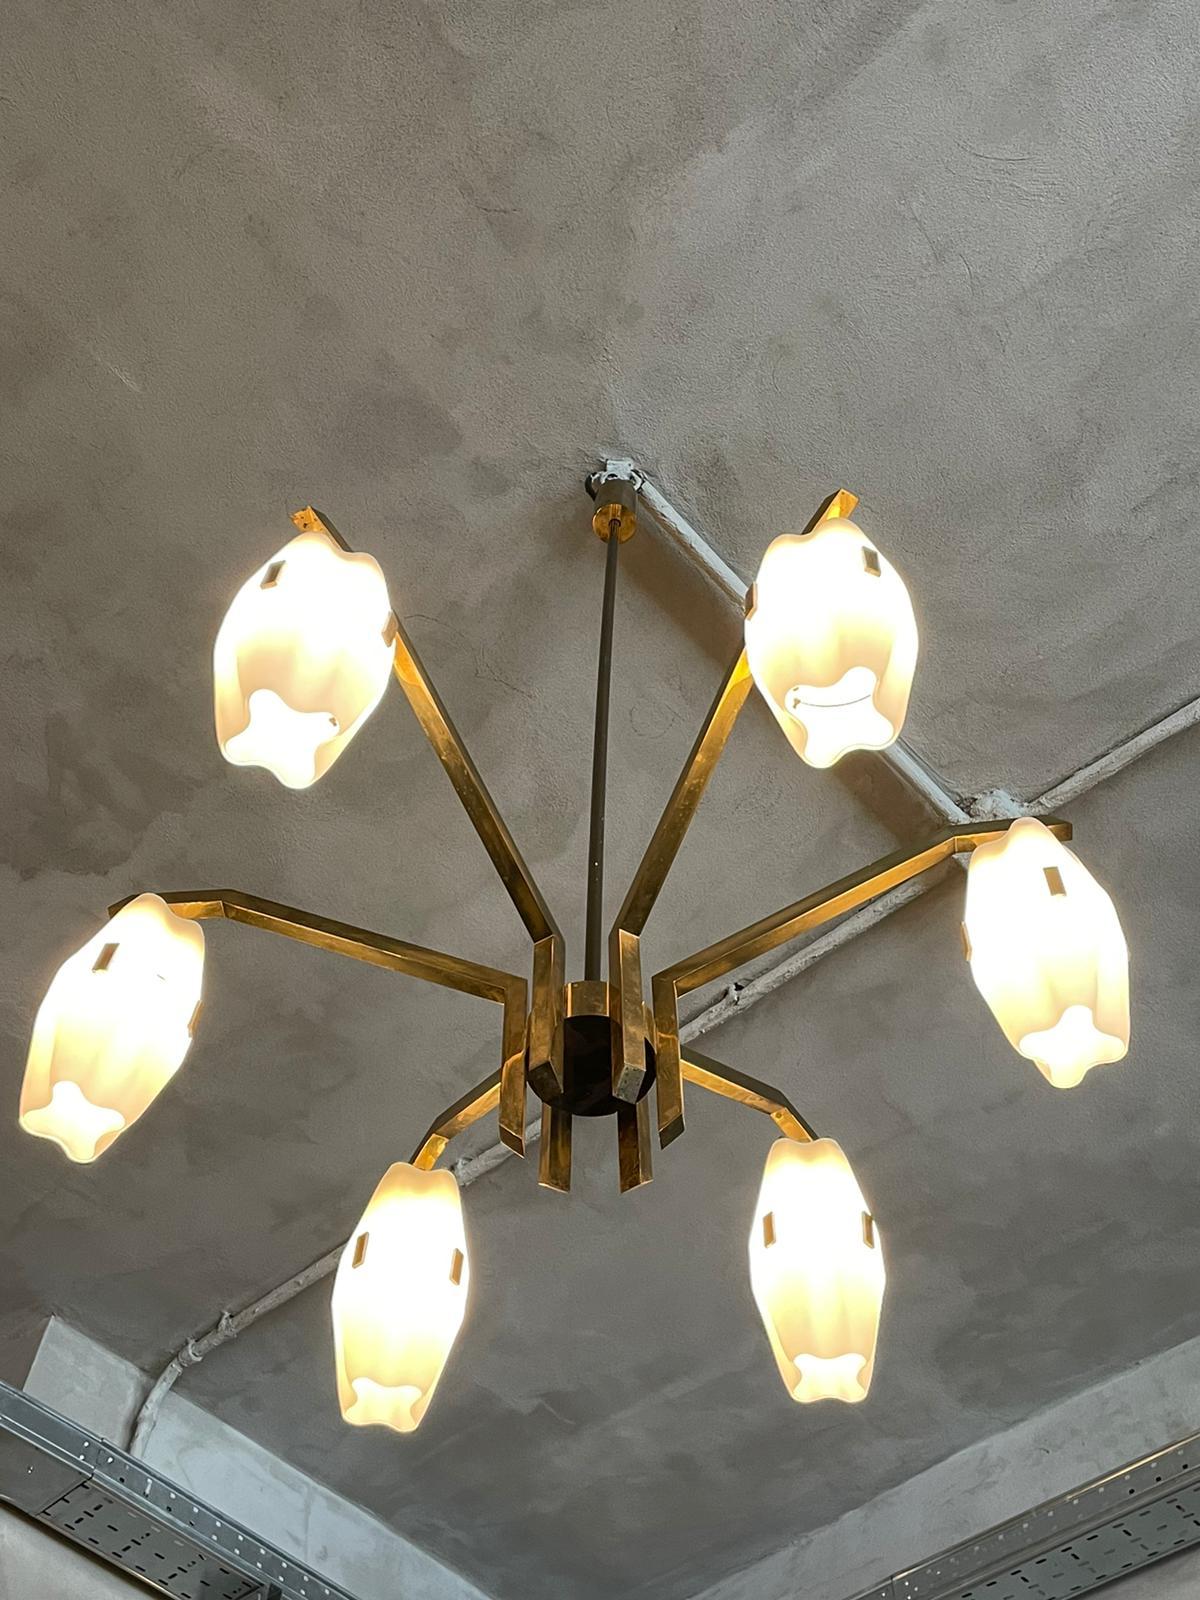 Chandelier mod. 12780 of Angelo Lelii for Arredoluce, Italy, 1959.
Structure in polished brass, diffusers in duplex white opal glass.
Excellent vintage patina.

References: Anty Pansera, Alessandro Padoan, Alessandro Palmaghini “ARREDOLUCE,